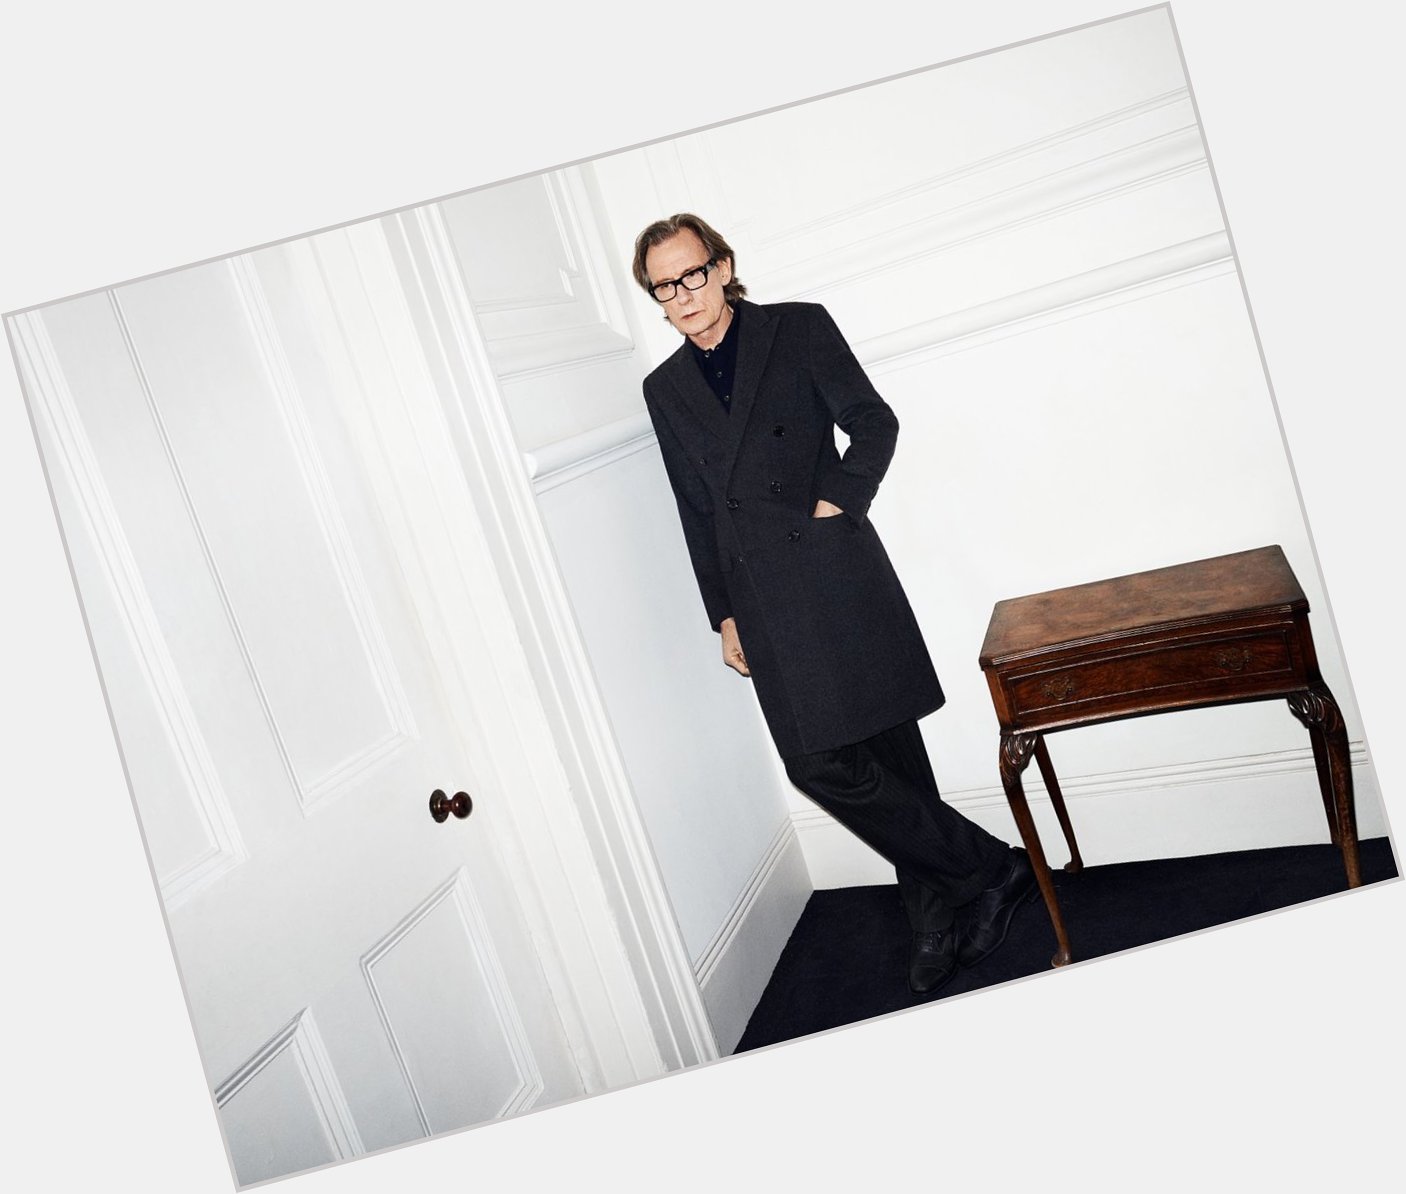            Happy Birthday Bill Nighy!
How To Wear Tailoring This Winter - Esquire  